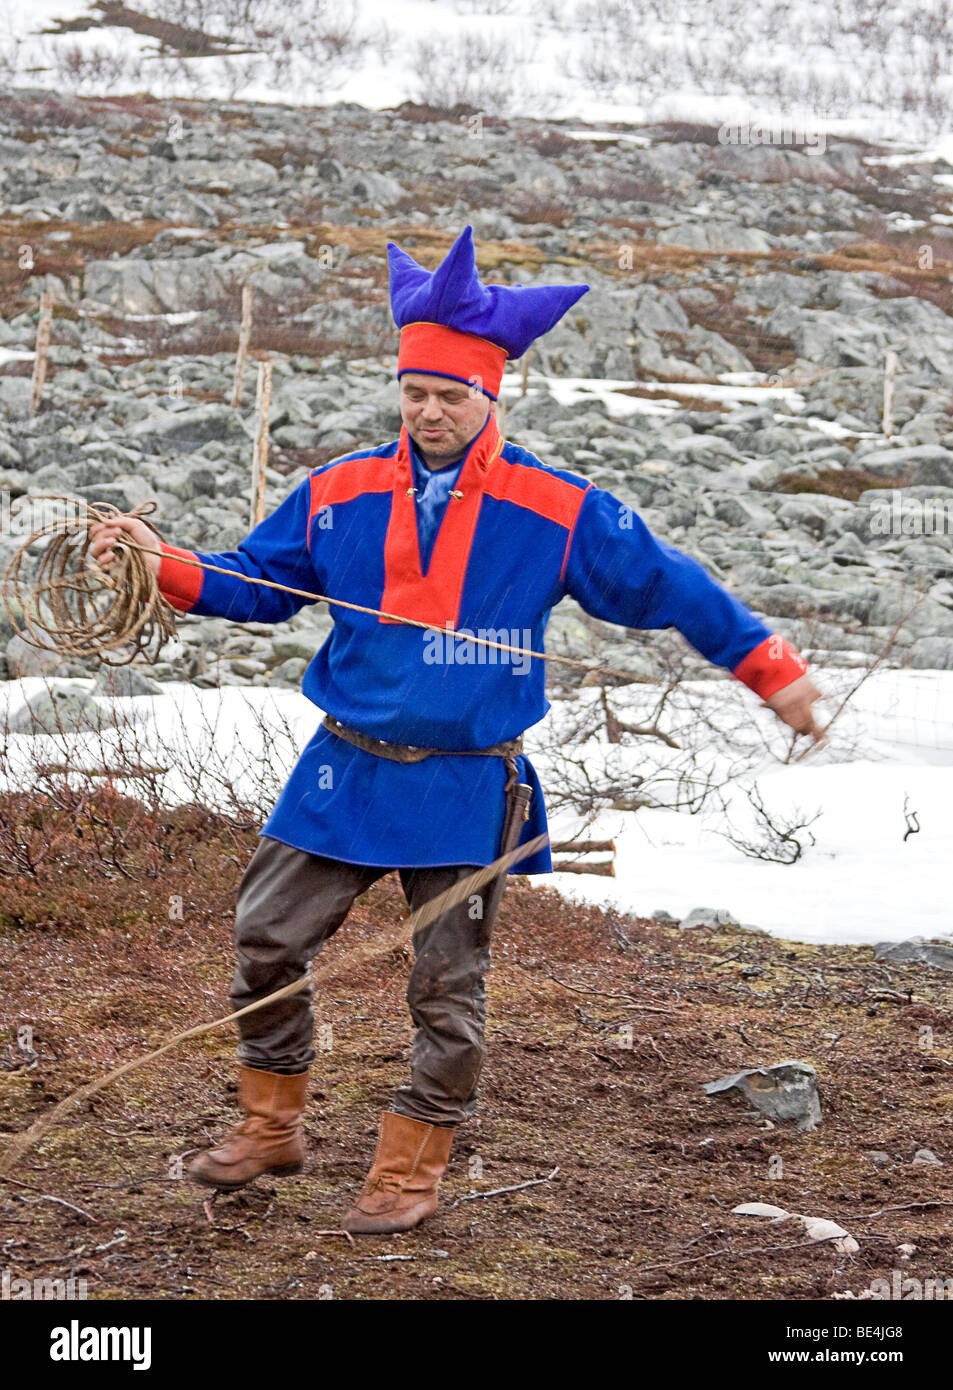 Middle aged Sami man in traditional clothing demonstrates techniques for lassoing reindeer at his camp Stock Photo